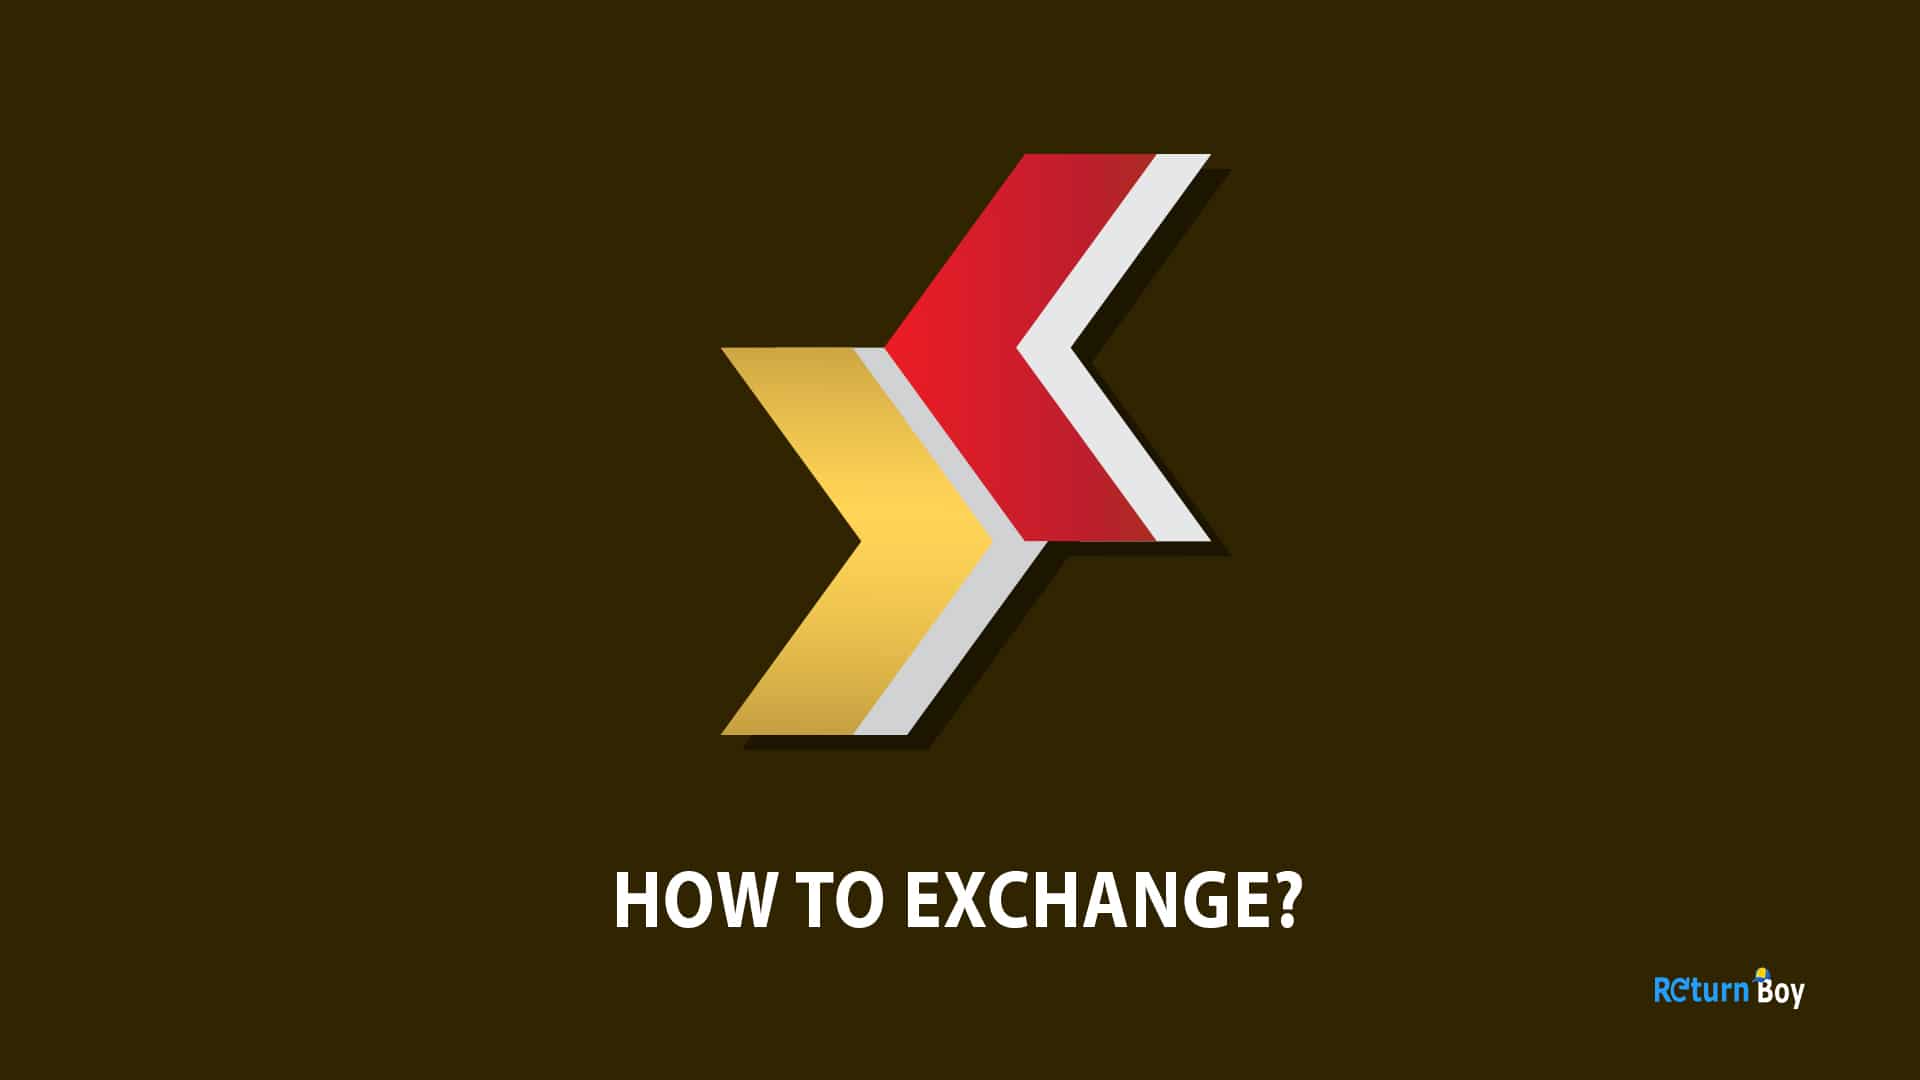 HOW TO EXCHANGE